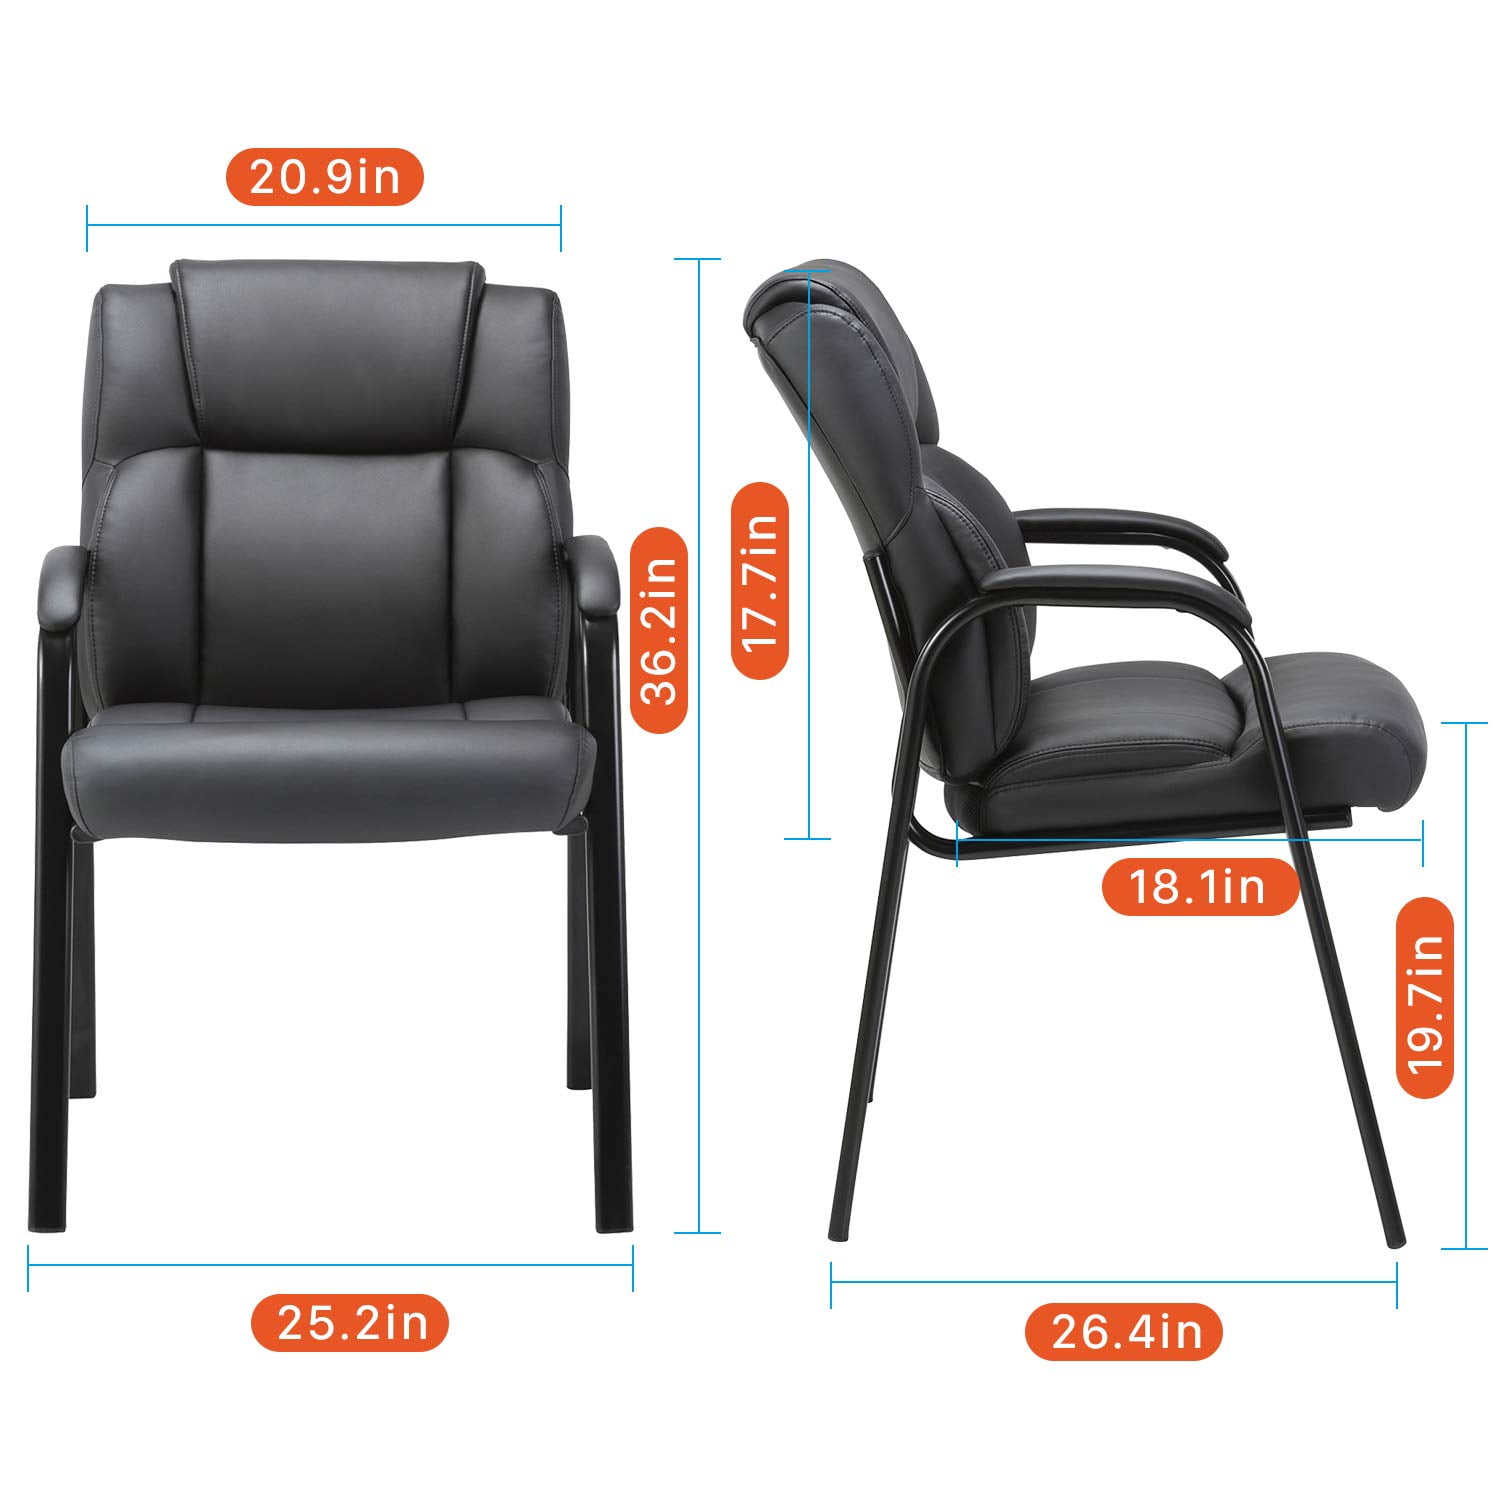 CLATINA Waiting Room Guest Chair with Bonded Leather Padded Arm Rest for Office Reception and Conference Desk Black 